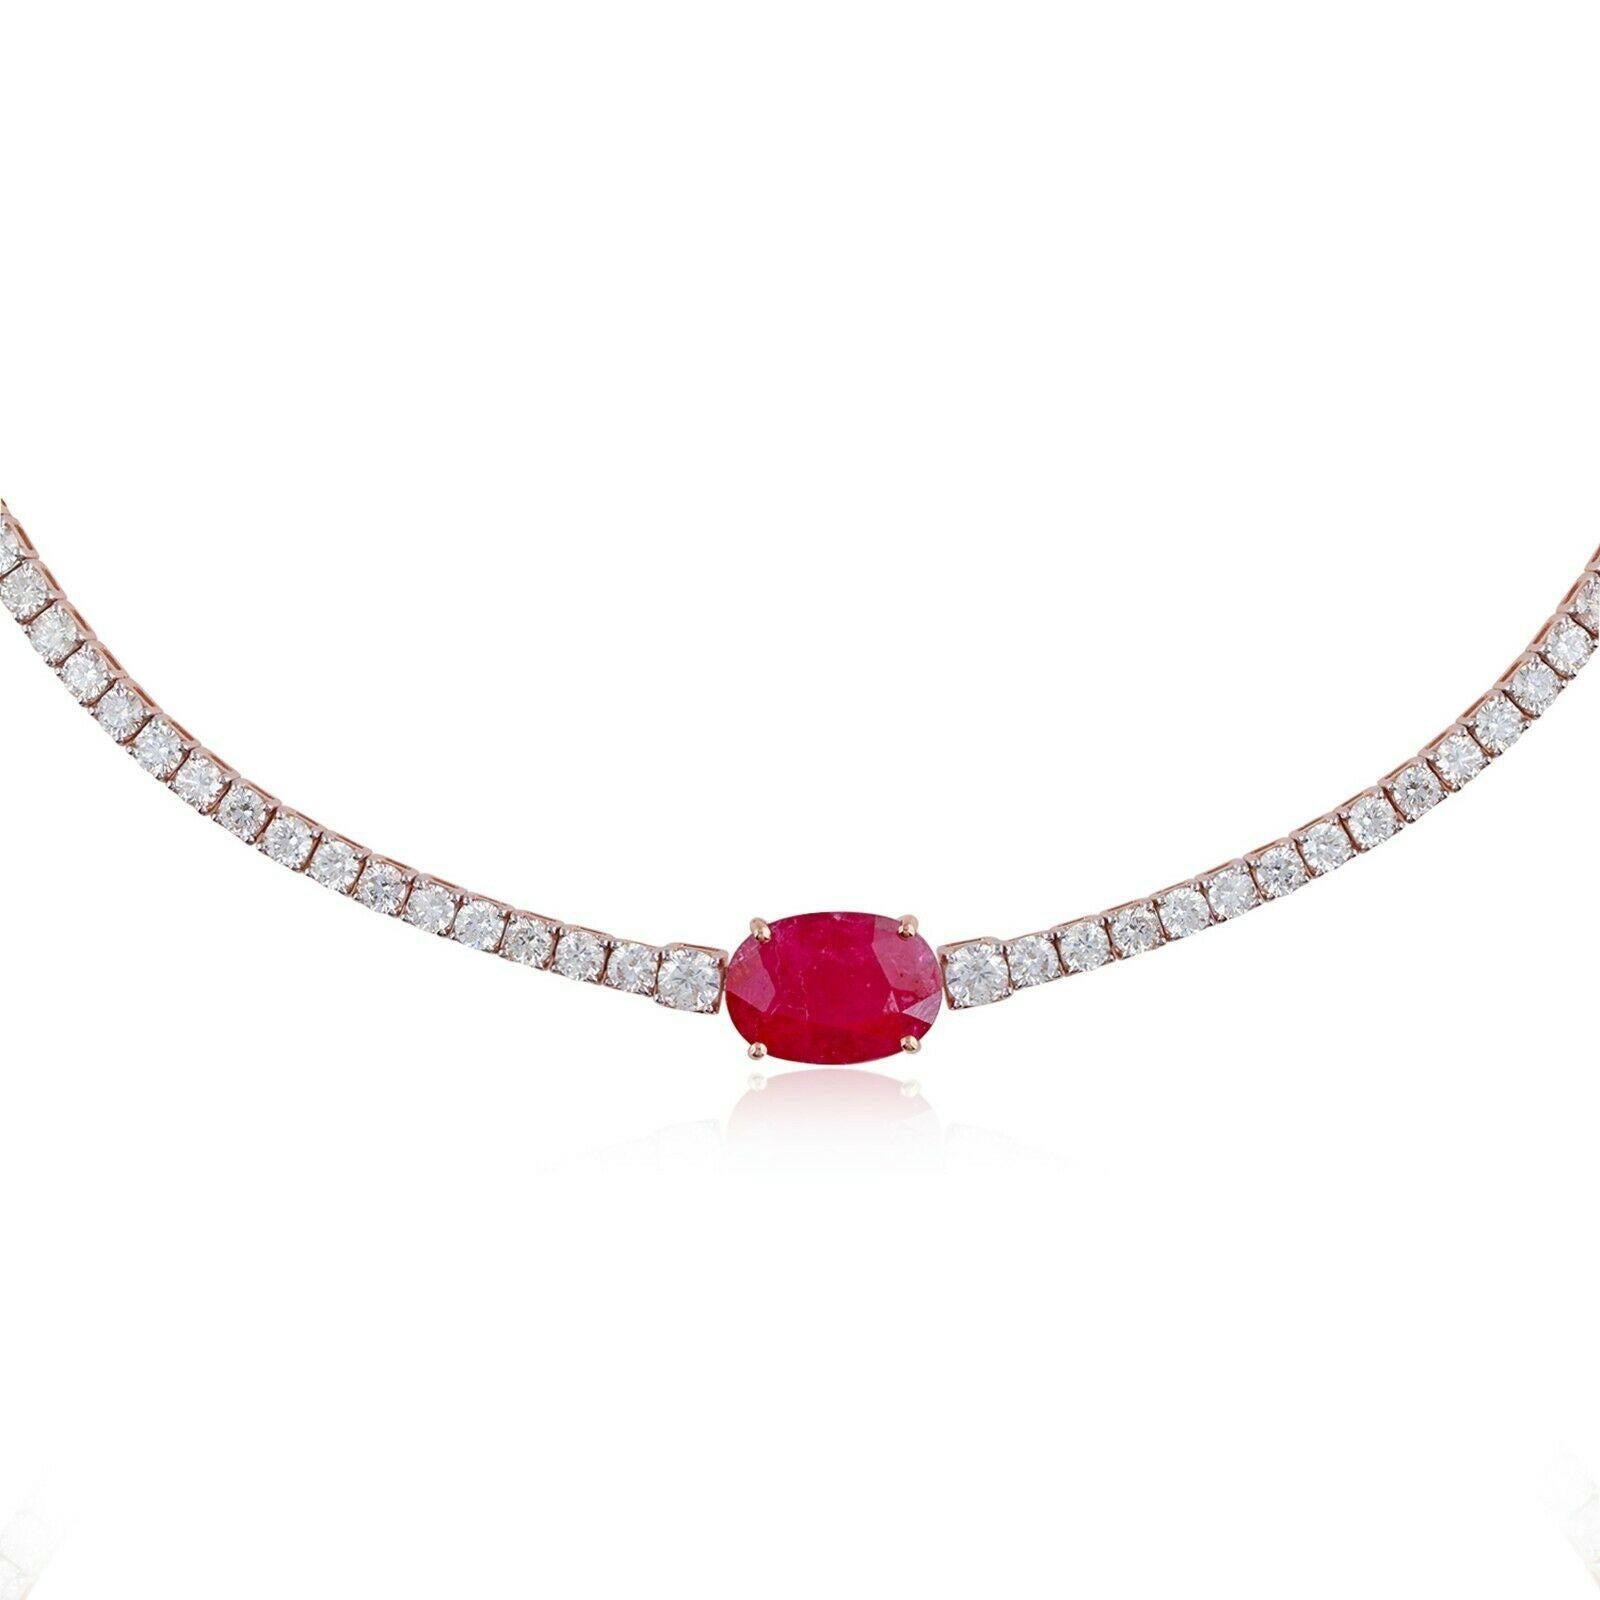 Cast from 14-karat rose gold, this stunning necklace is hand set with 5.62 carats Ruby and 6.10 carats of sparkling diamonds. 

FOLLOW MEGHNA JEWELS storefront to view the latest collection & exclusive pieces. Meghna Jewels is proudly rated as a Top